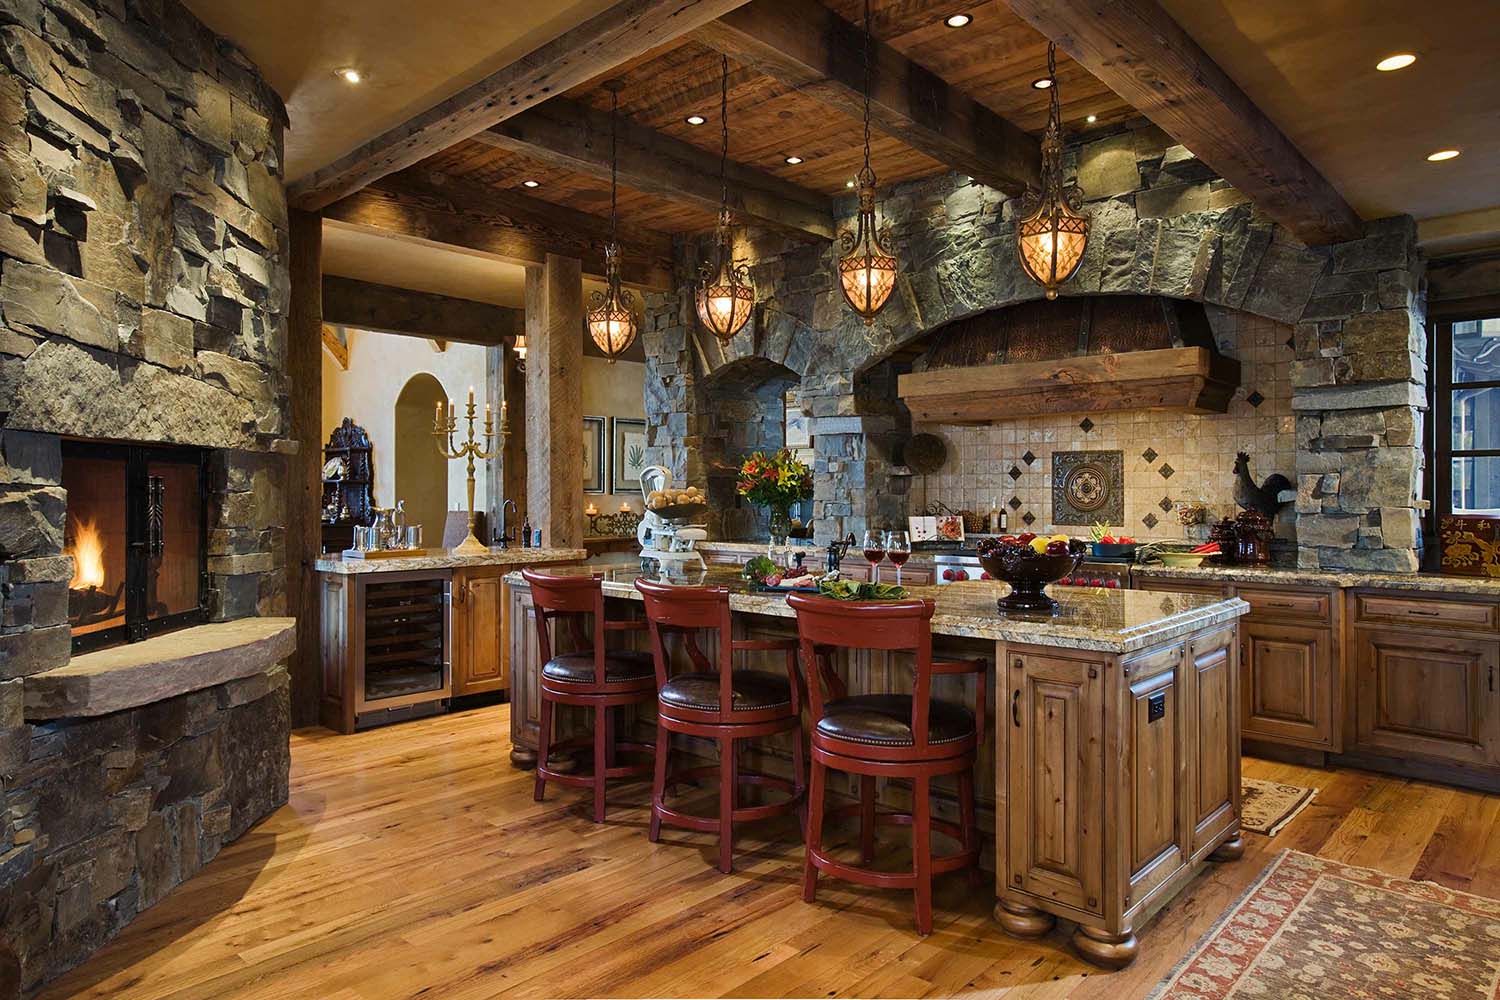 Rocky Mountain Fireplace Inspirational Handcrafted Timber Frame Home with astonishing Rocky